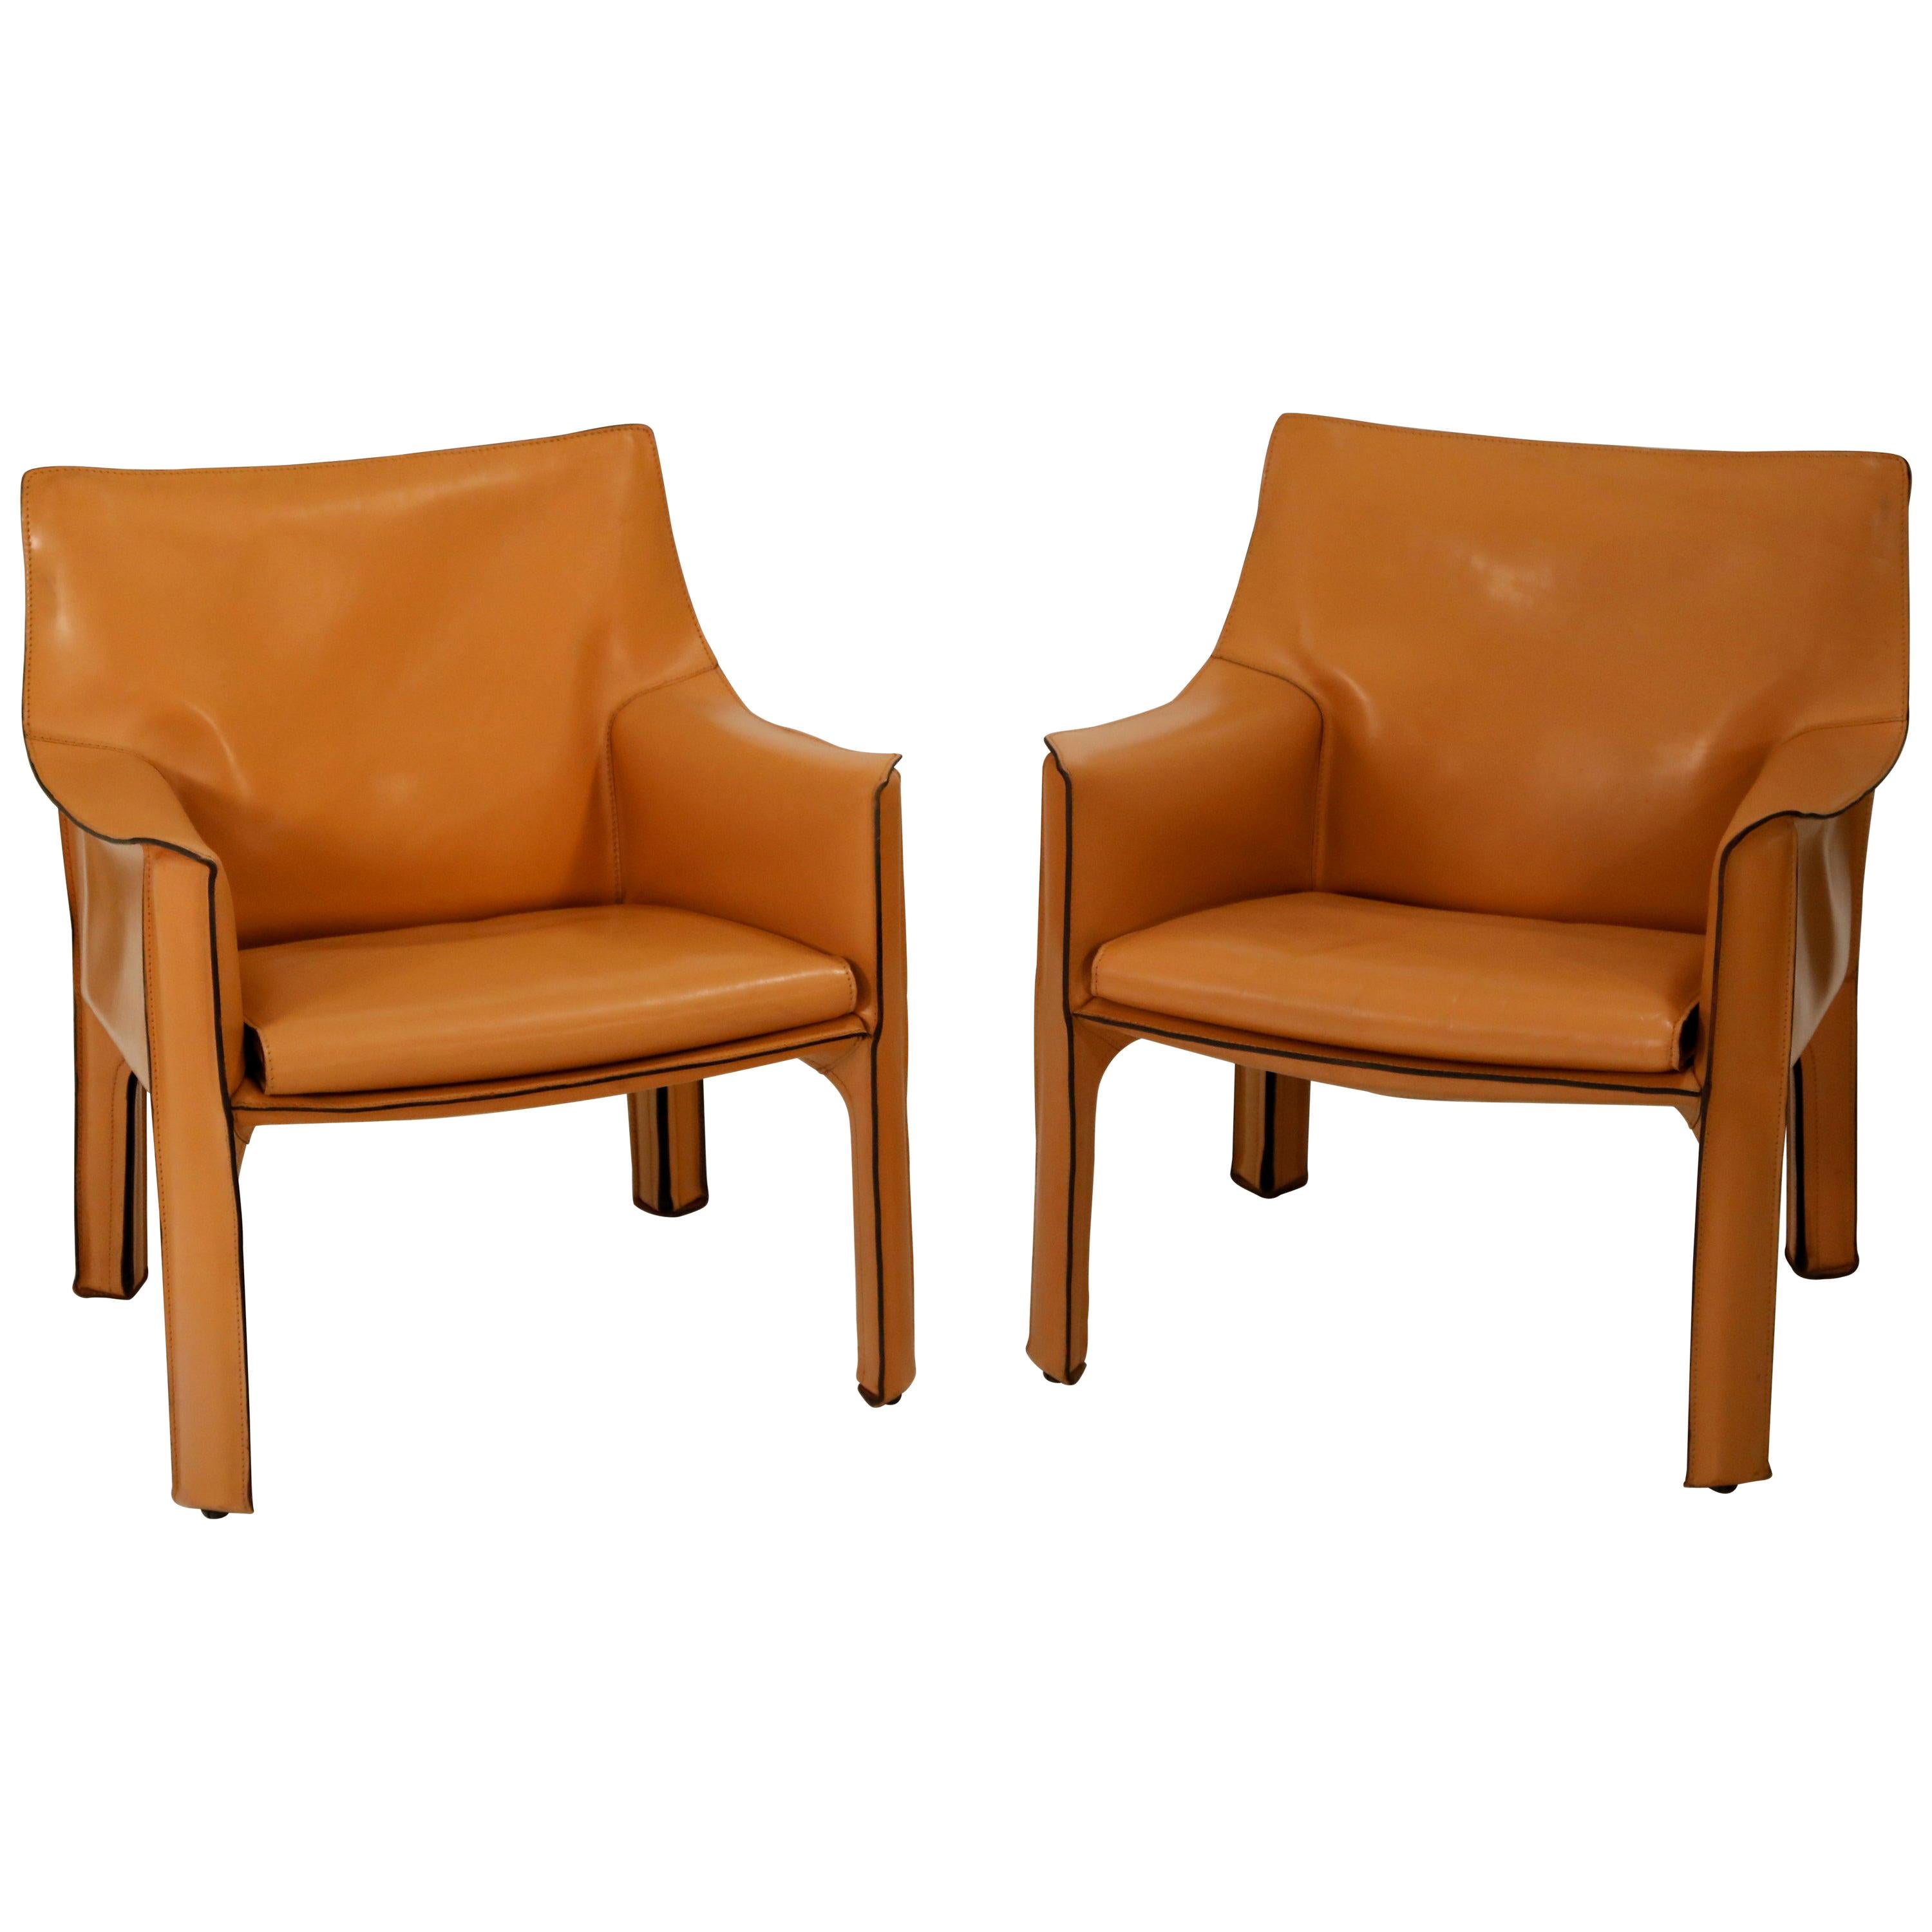 Pair of Mario Bellini for Cassina "Cab 414" Lounge Chairs, Signed, circa 1970s